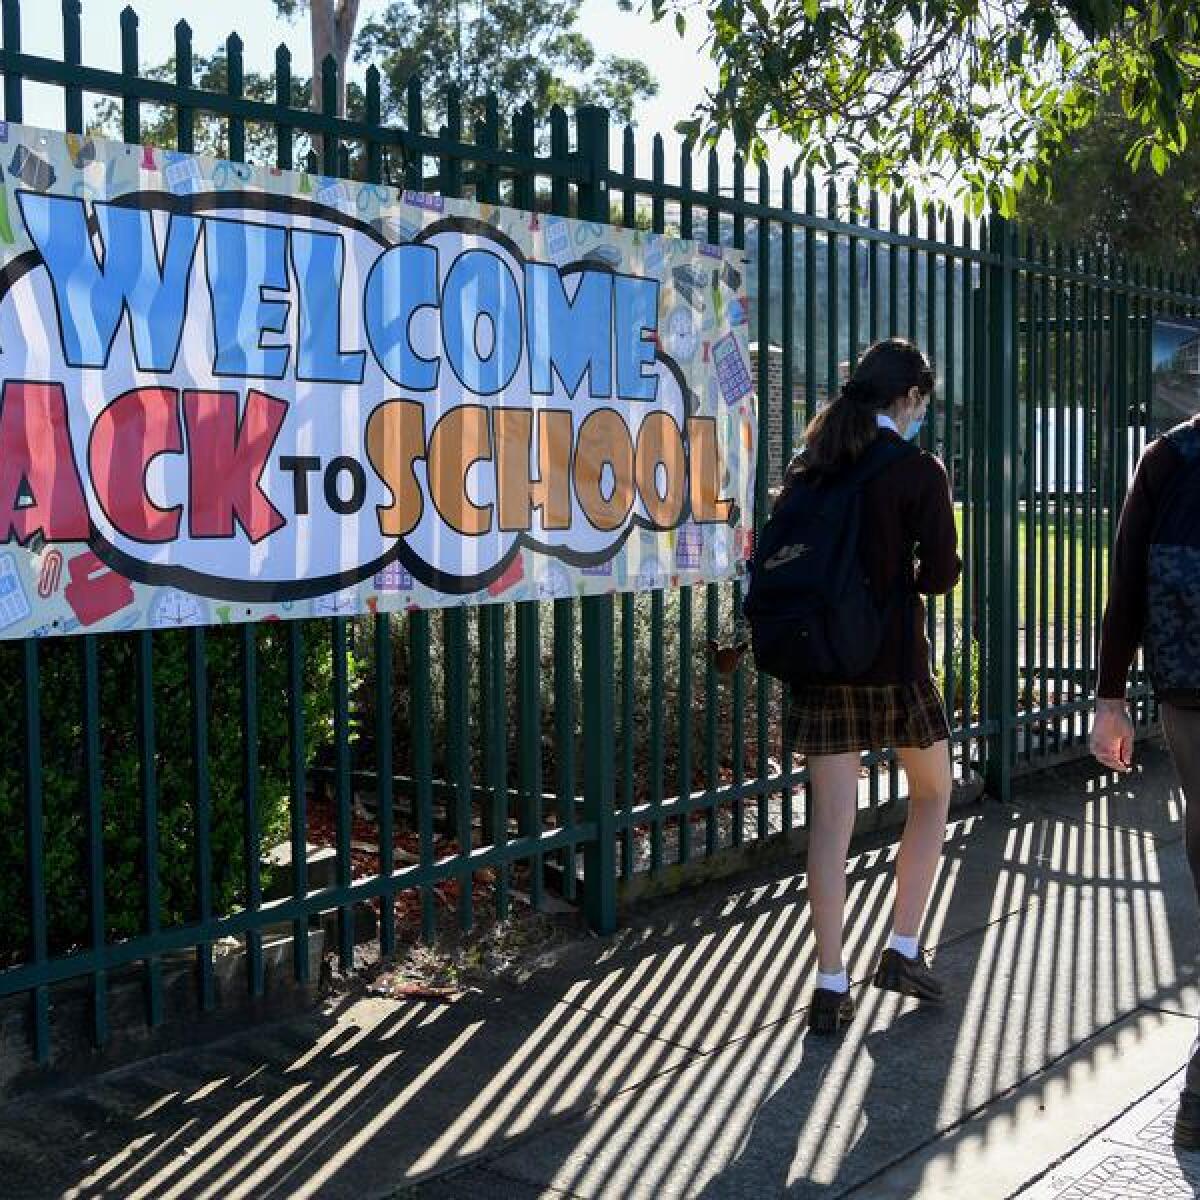 A 'Welcome Back to School' banner (file image)